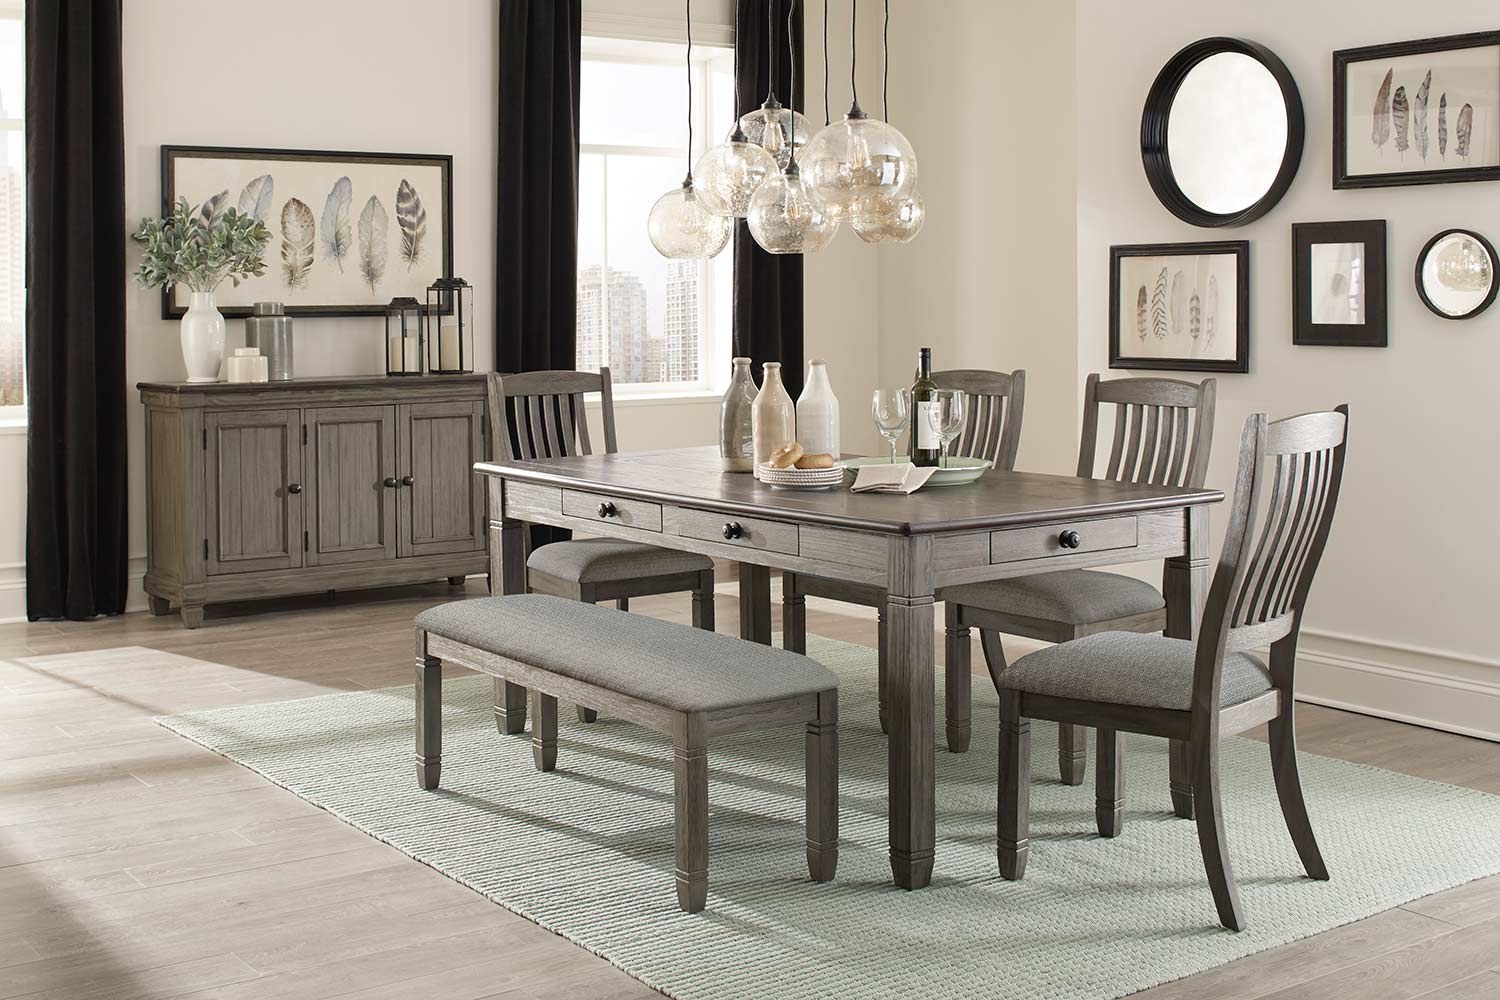 Homelegance Granby Dining Set - Antique Gray and Coffee